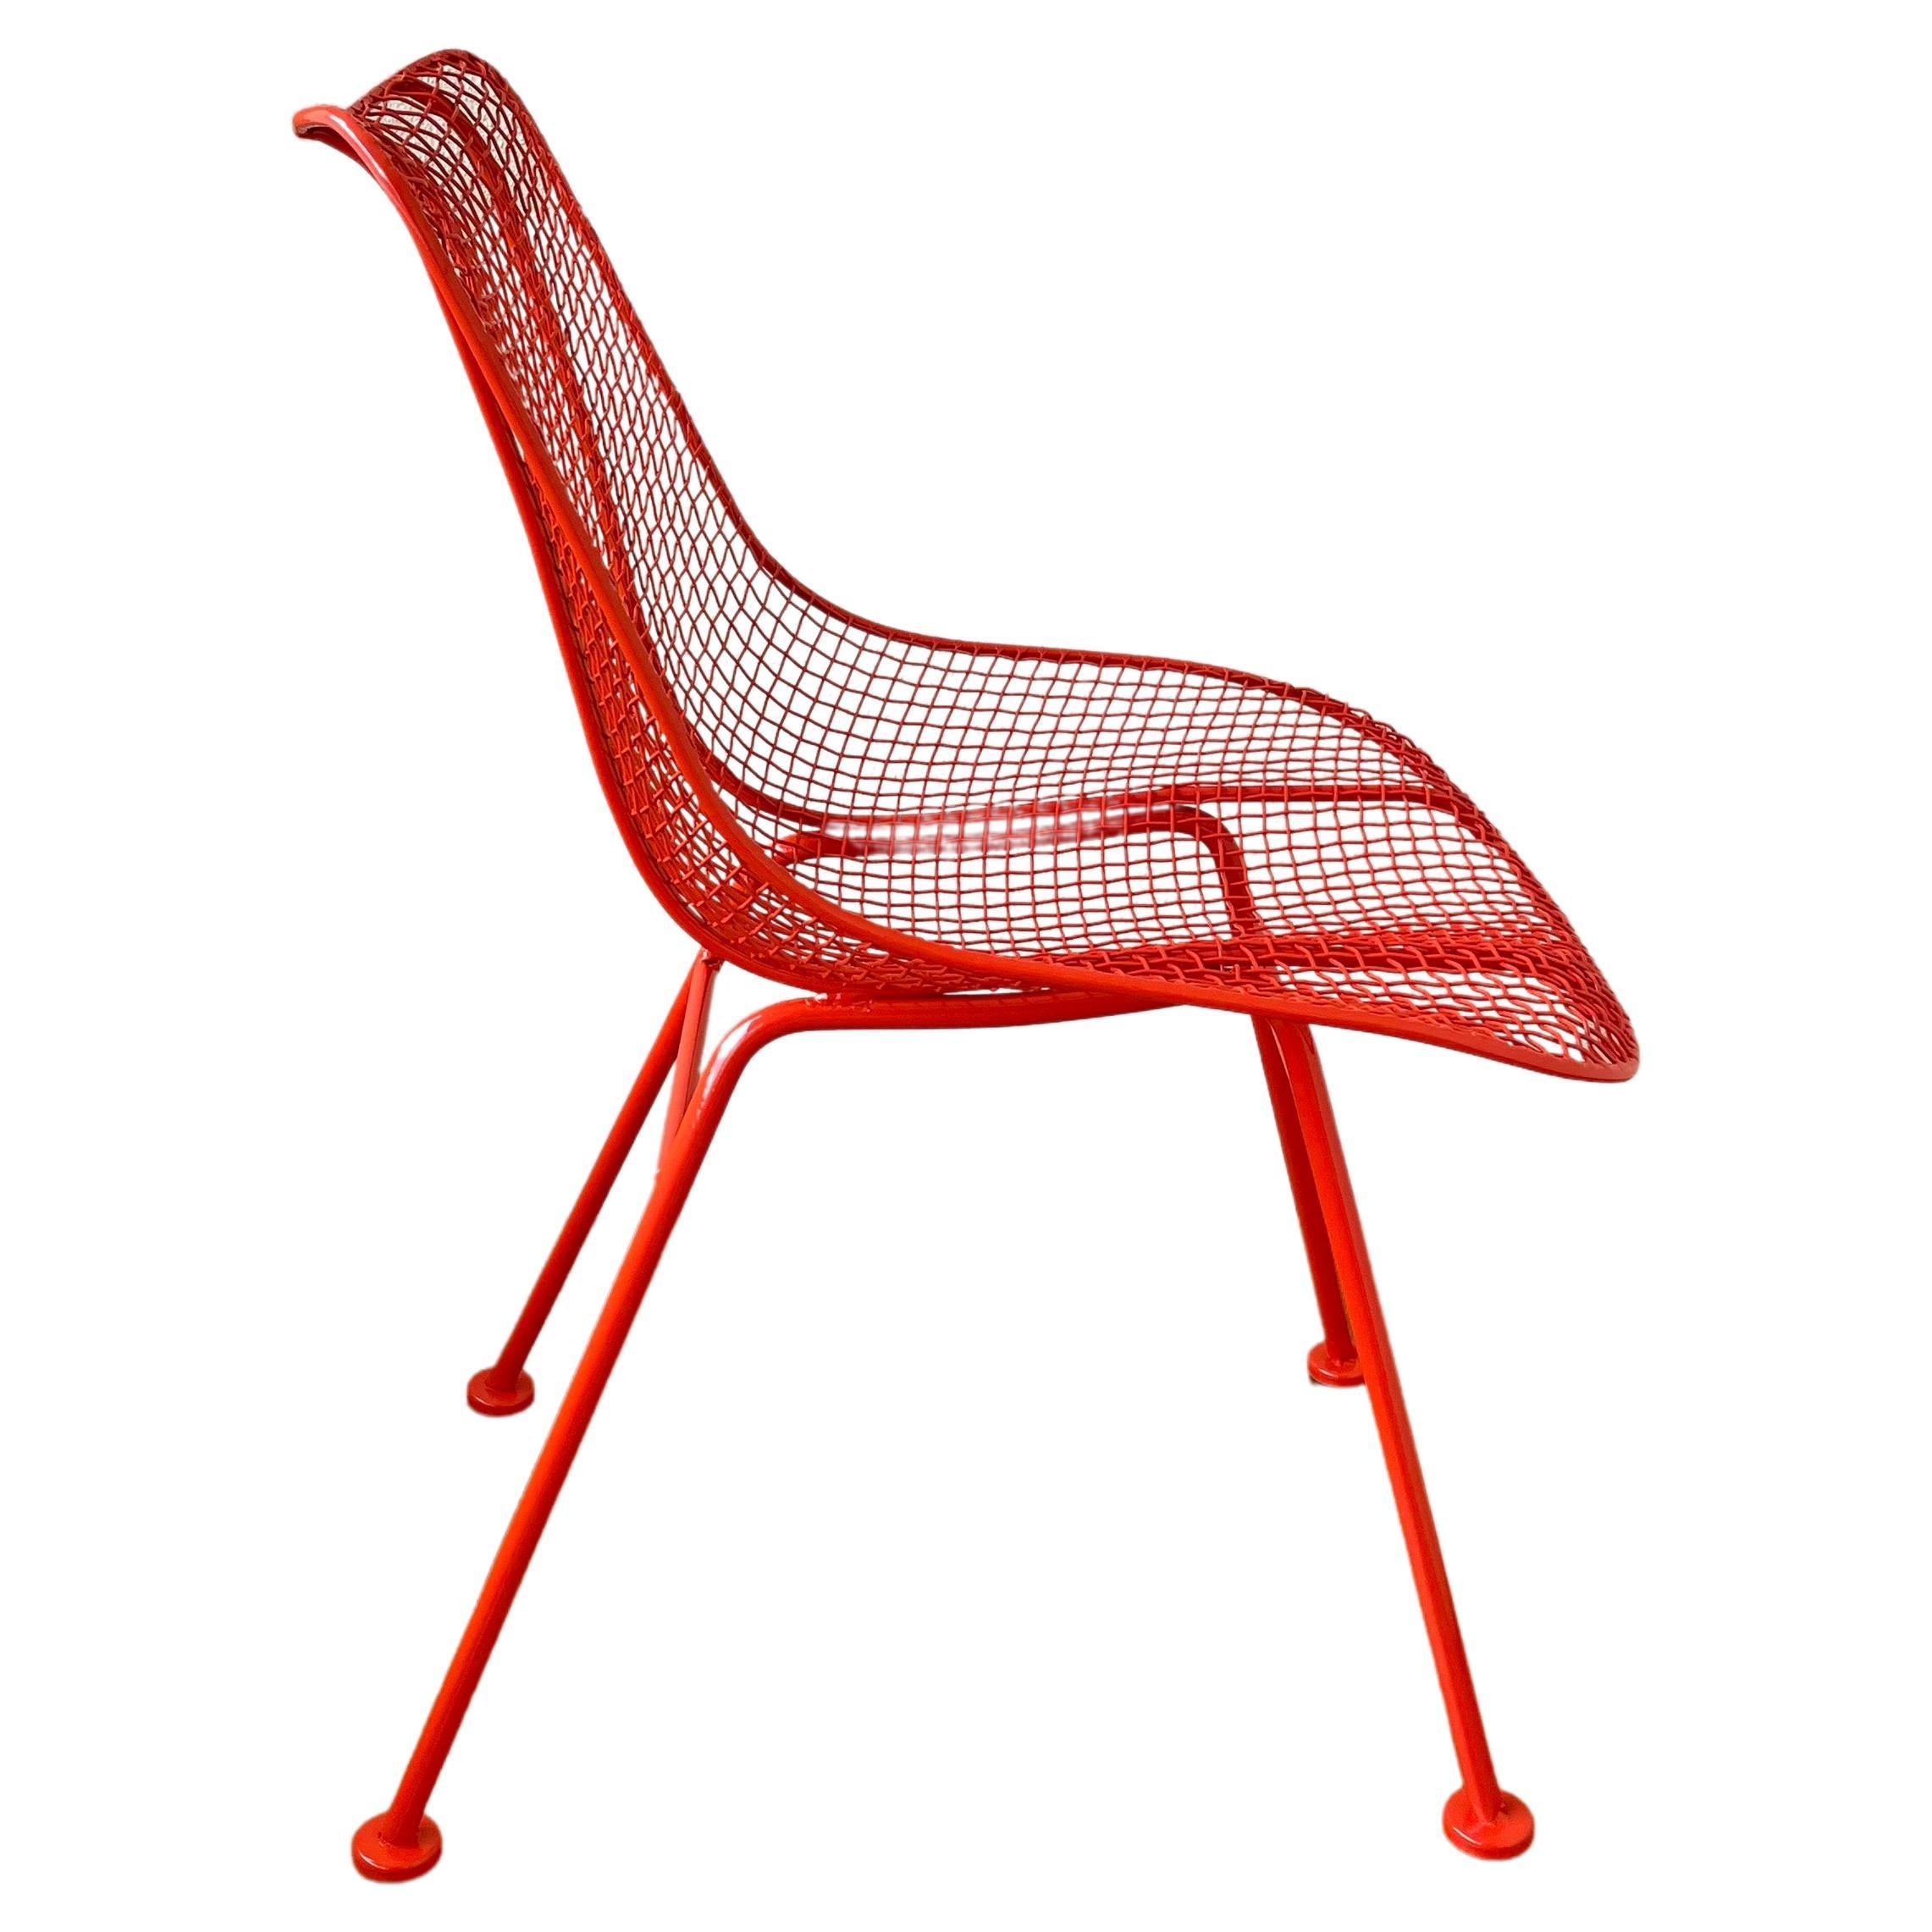 American Mid-Century Modern Sulptura Chair Design by Russell Woodard